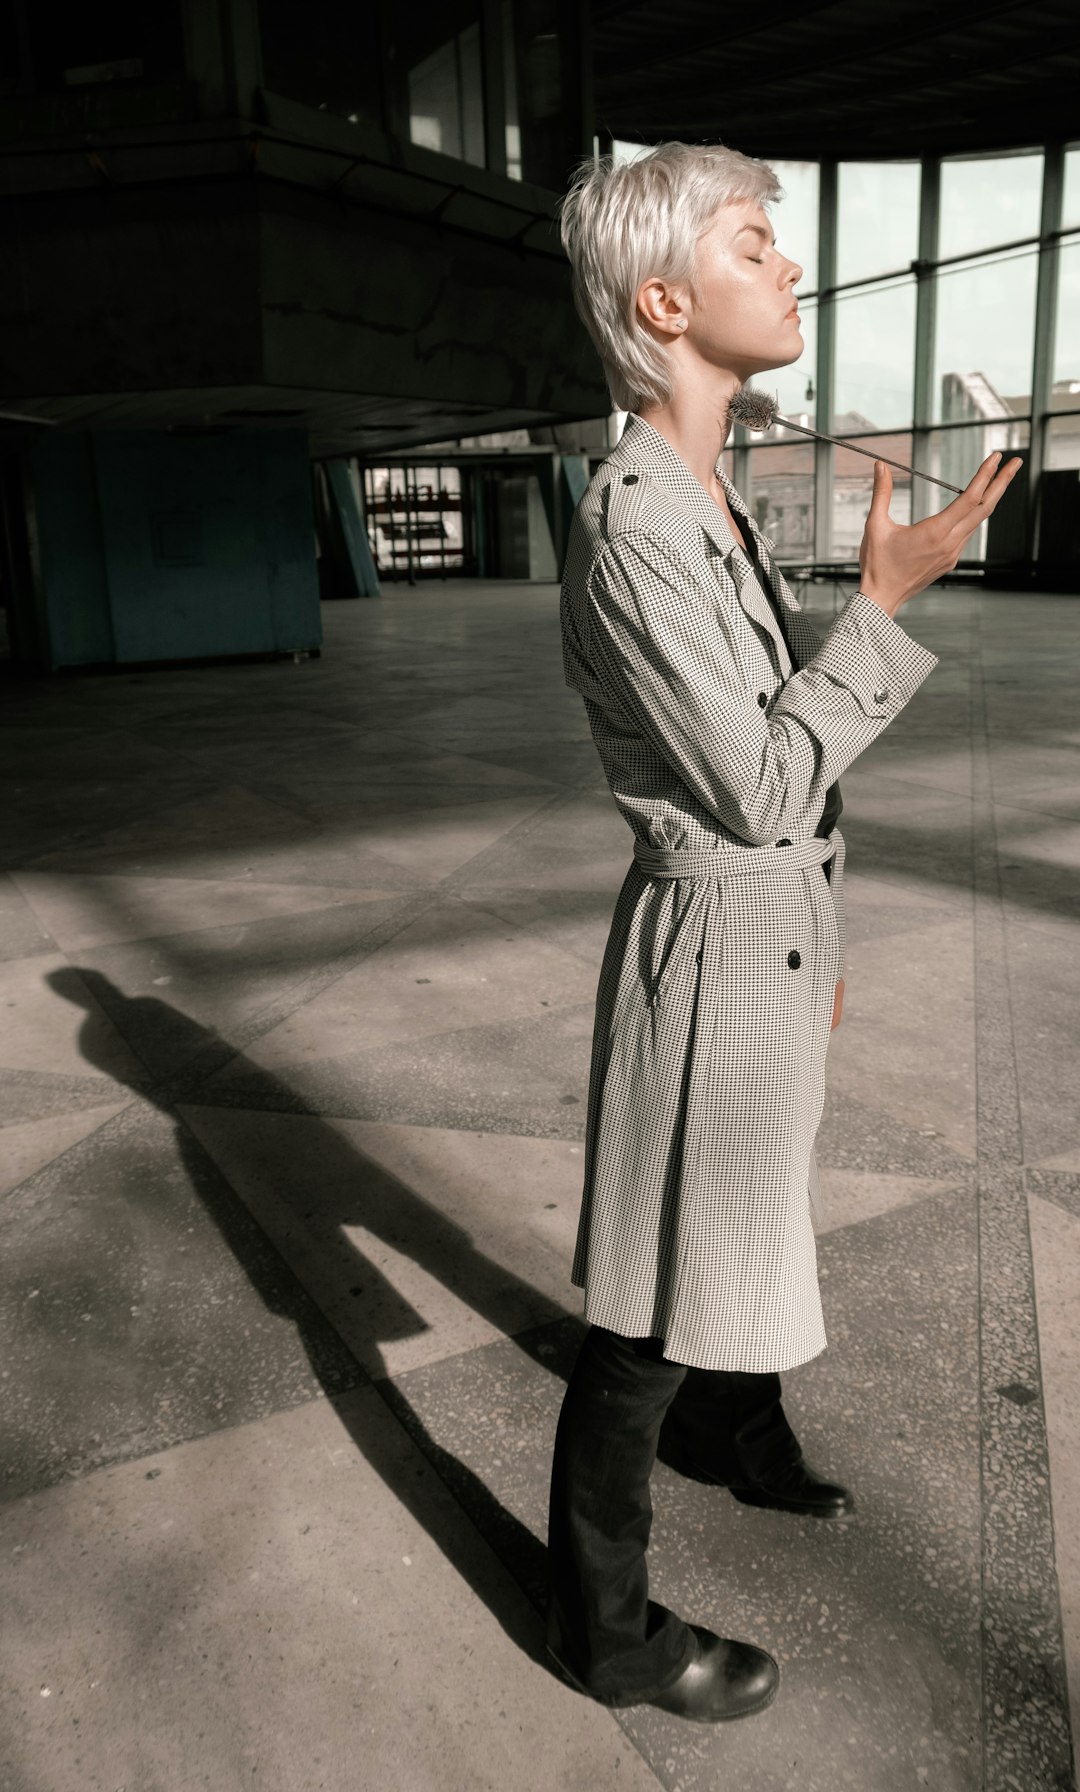 woman in white and black long sleeve dress standing on gray concrete floor